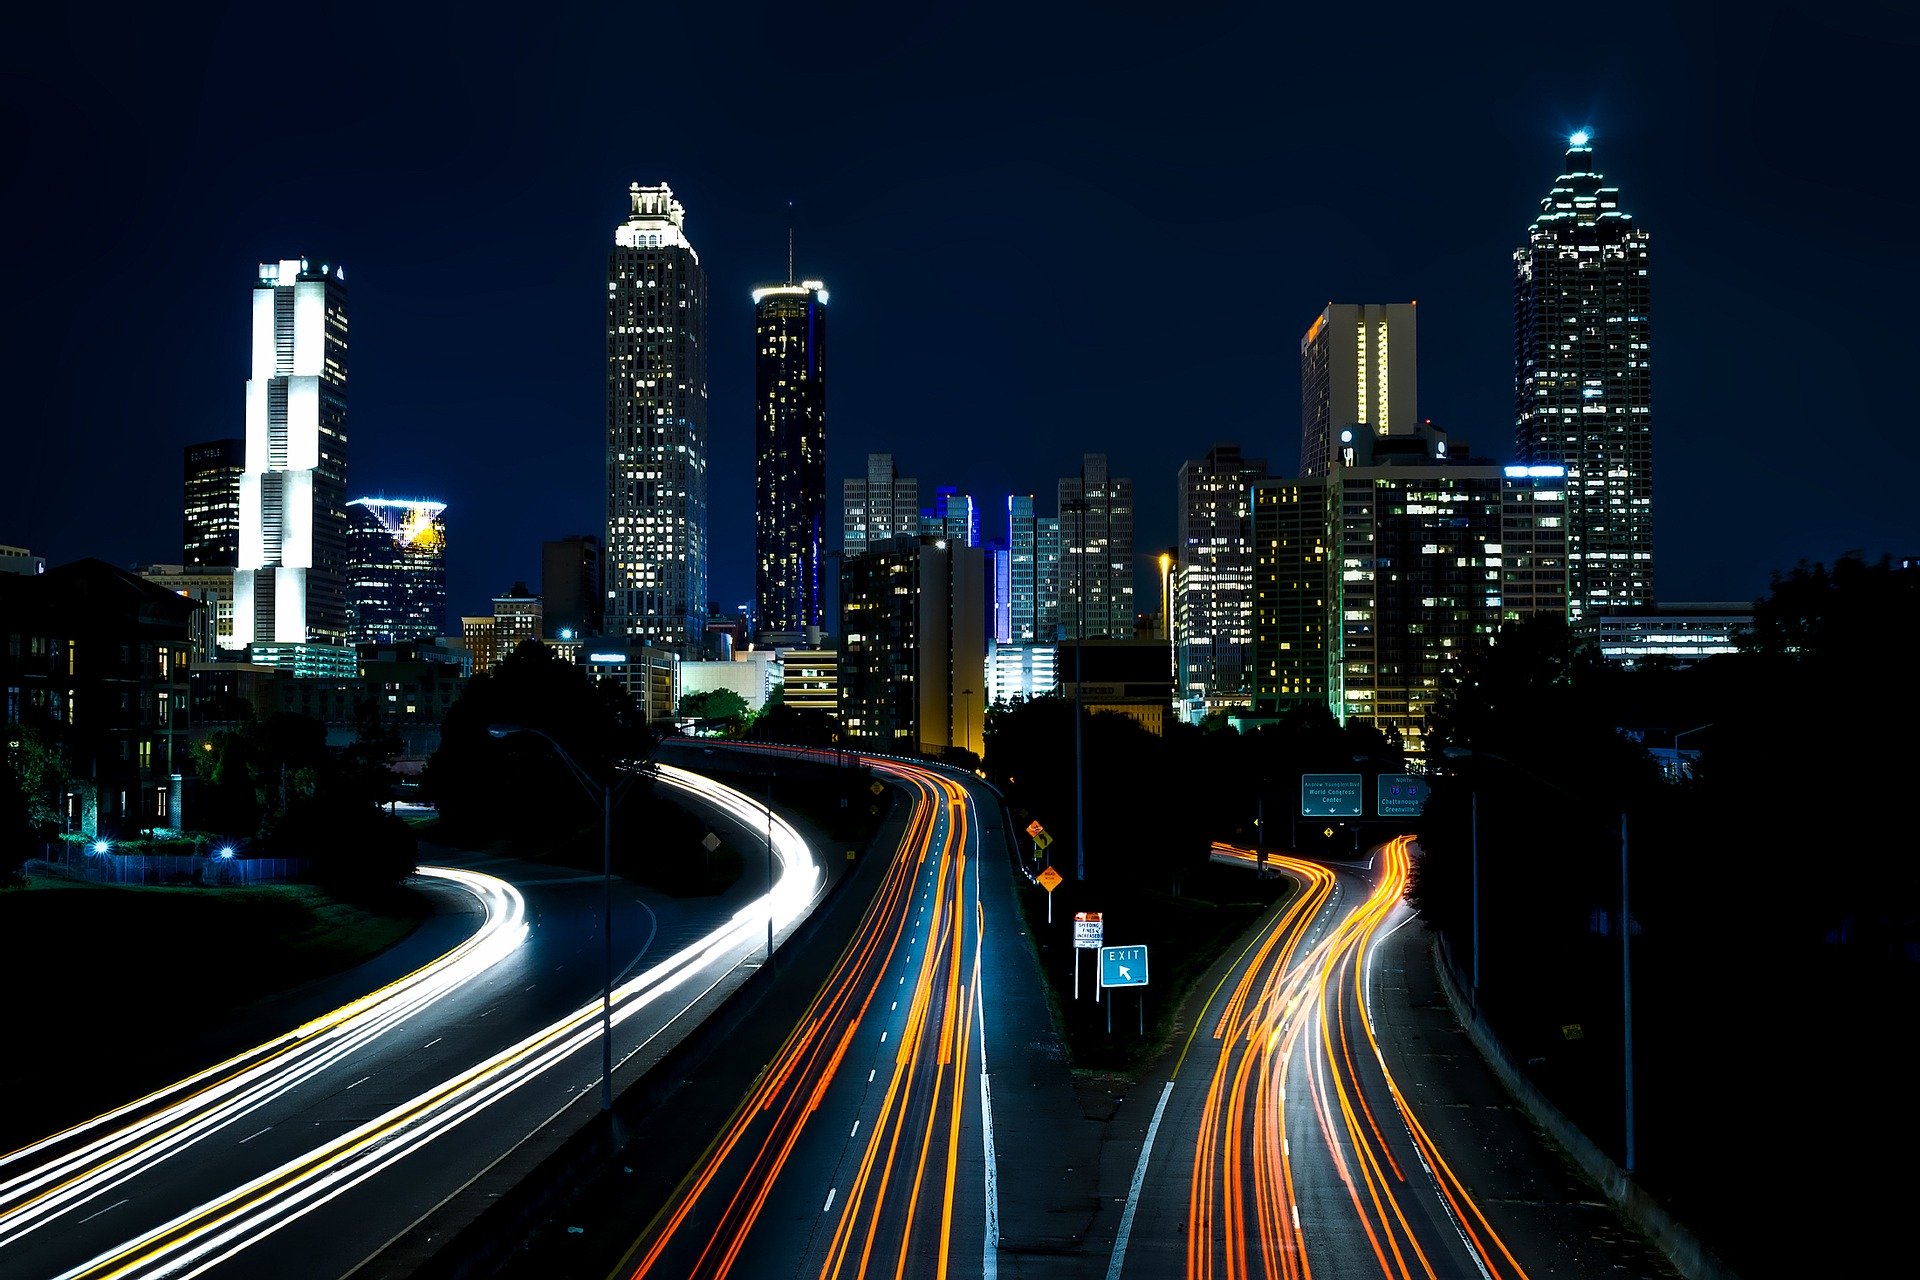 Atlanta at night with bright buildings and streams of light on the streets